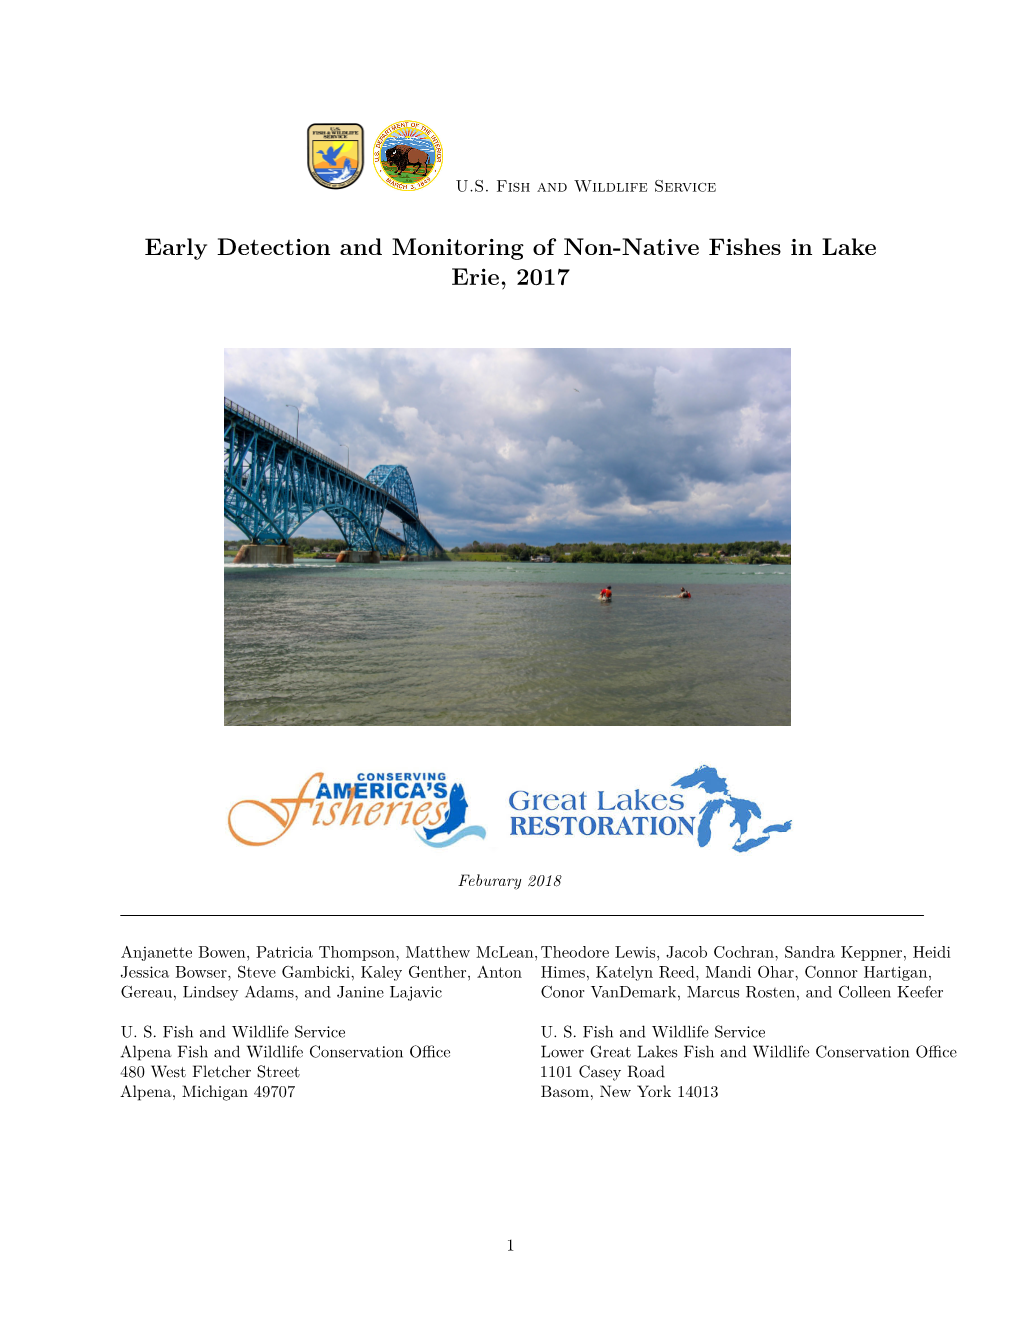 Early Detection and Monitoring of Non-Native Fishes in Lake Erie, 2017